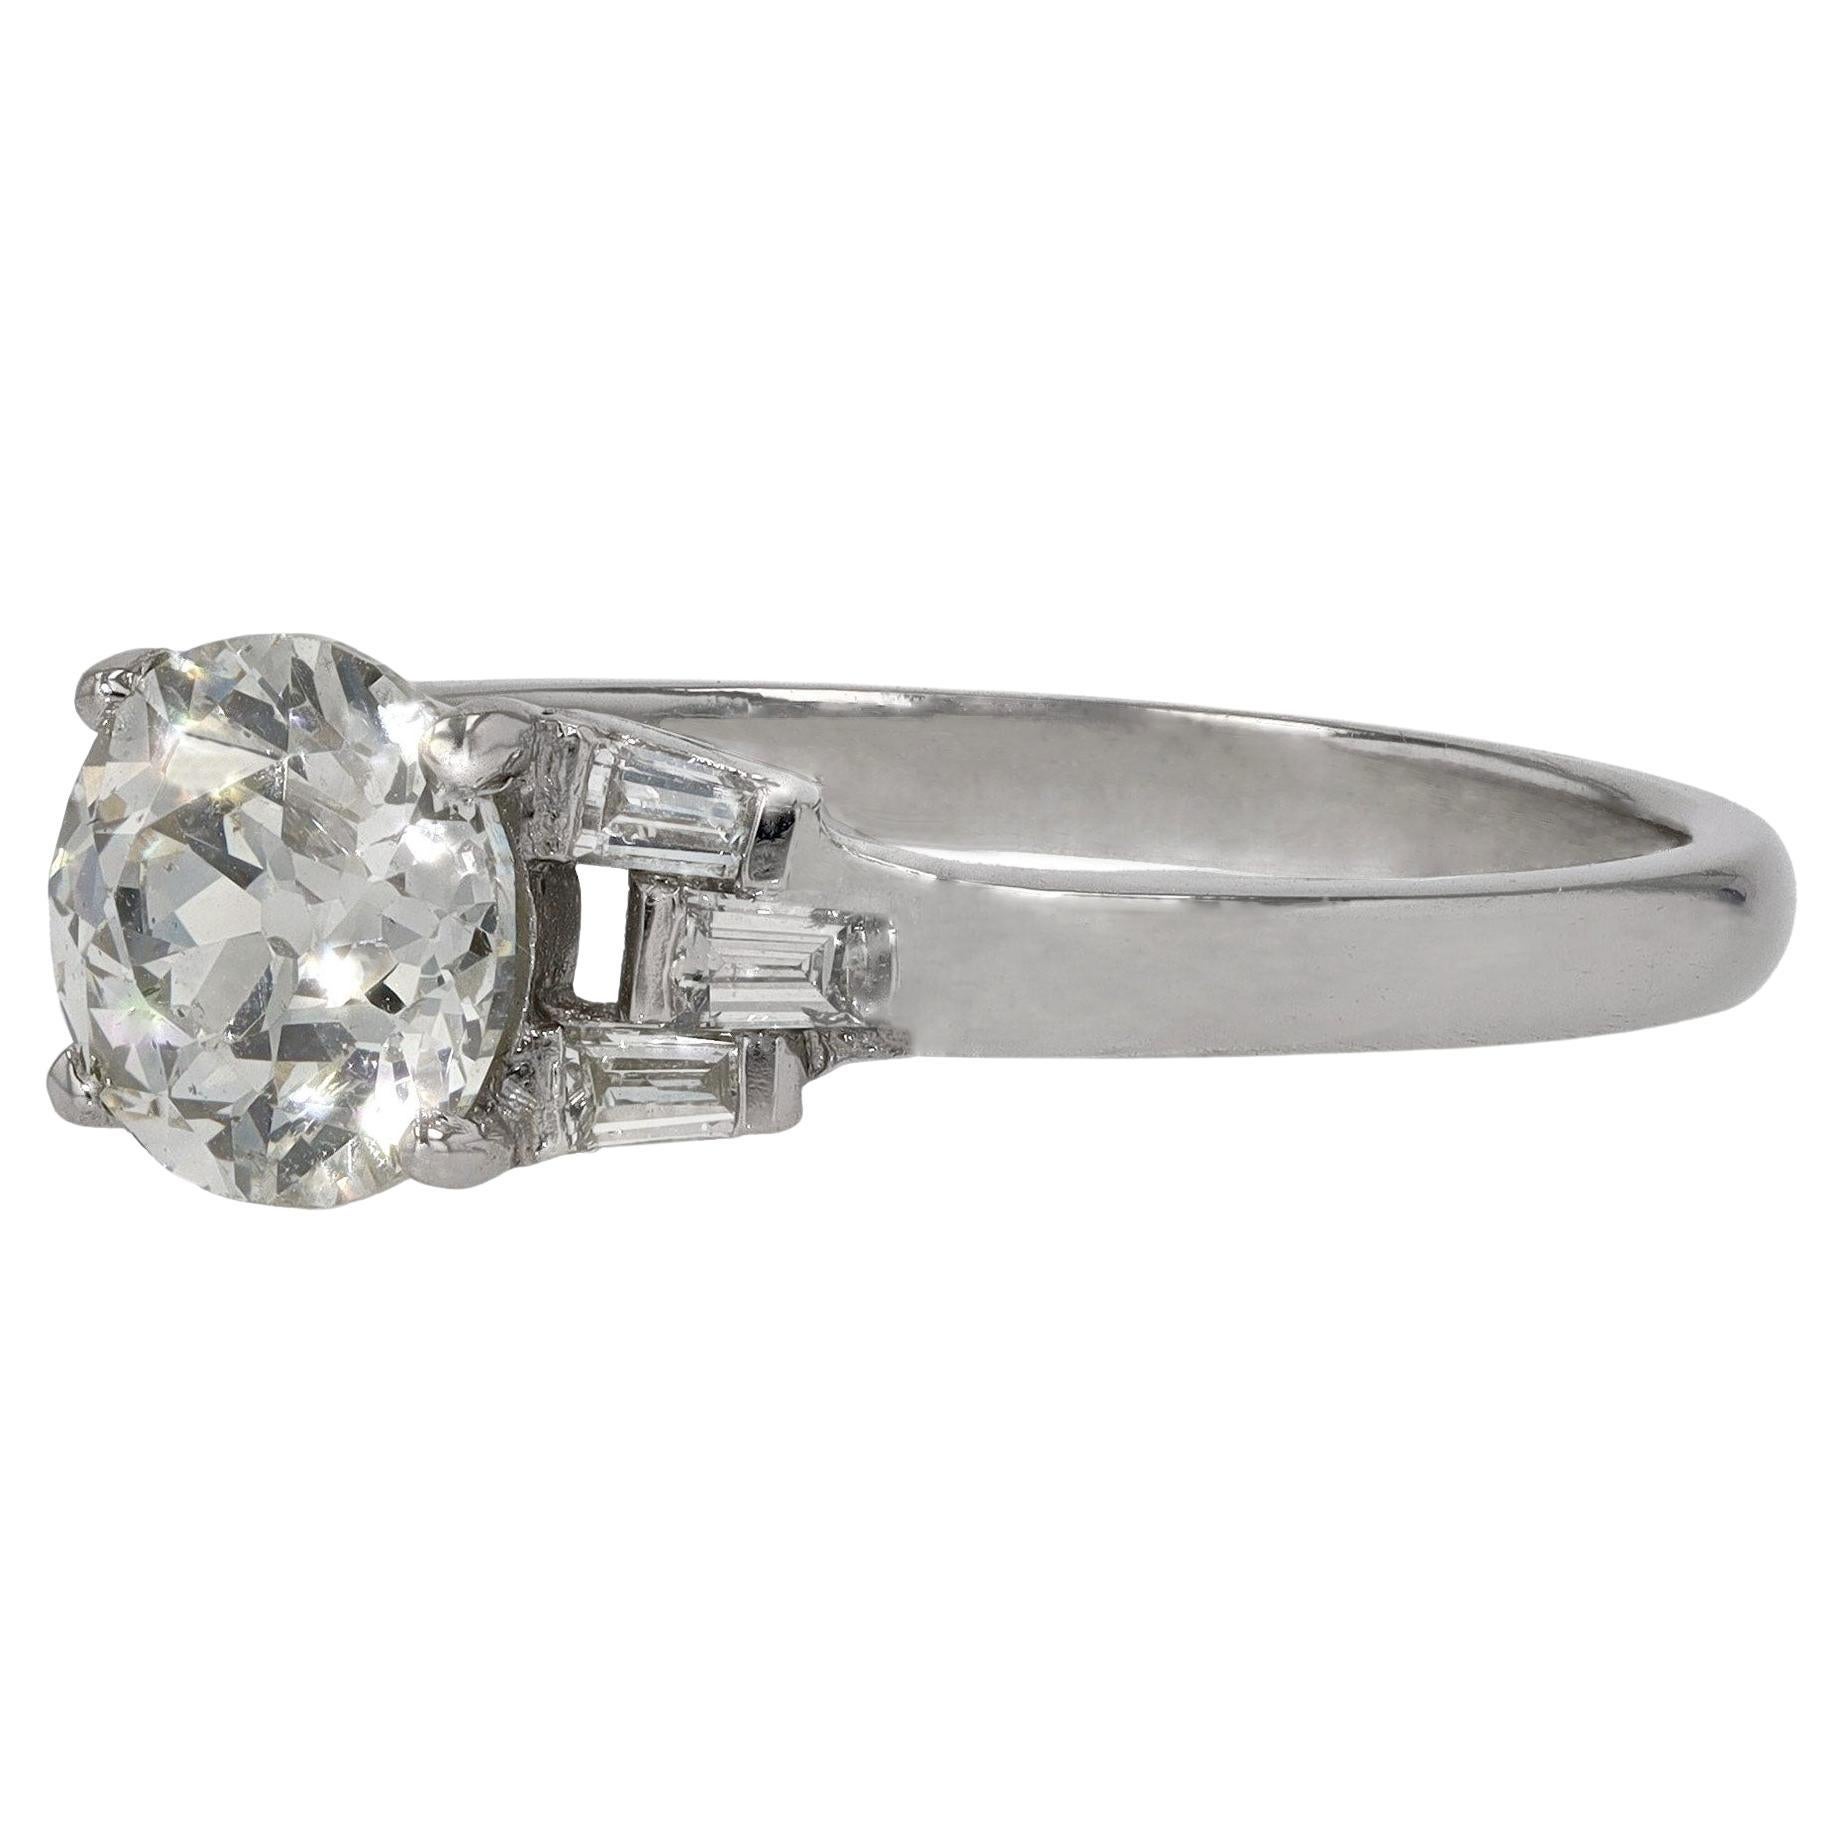 Sleek, geometric lines are portrayed in this classic Art Deco solitaire engagement ring. The near-colorless 1.19 carat old European cut diamond is spectacular and is accompanied by an EGL Gemological Laboratory report. Shimmering in candlelight, the